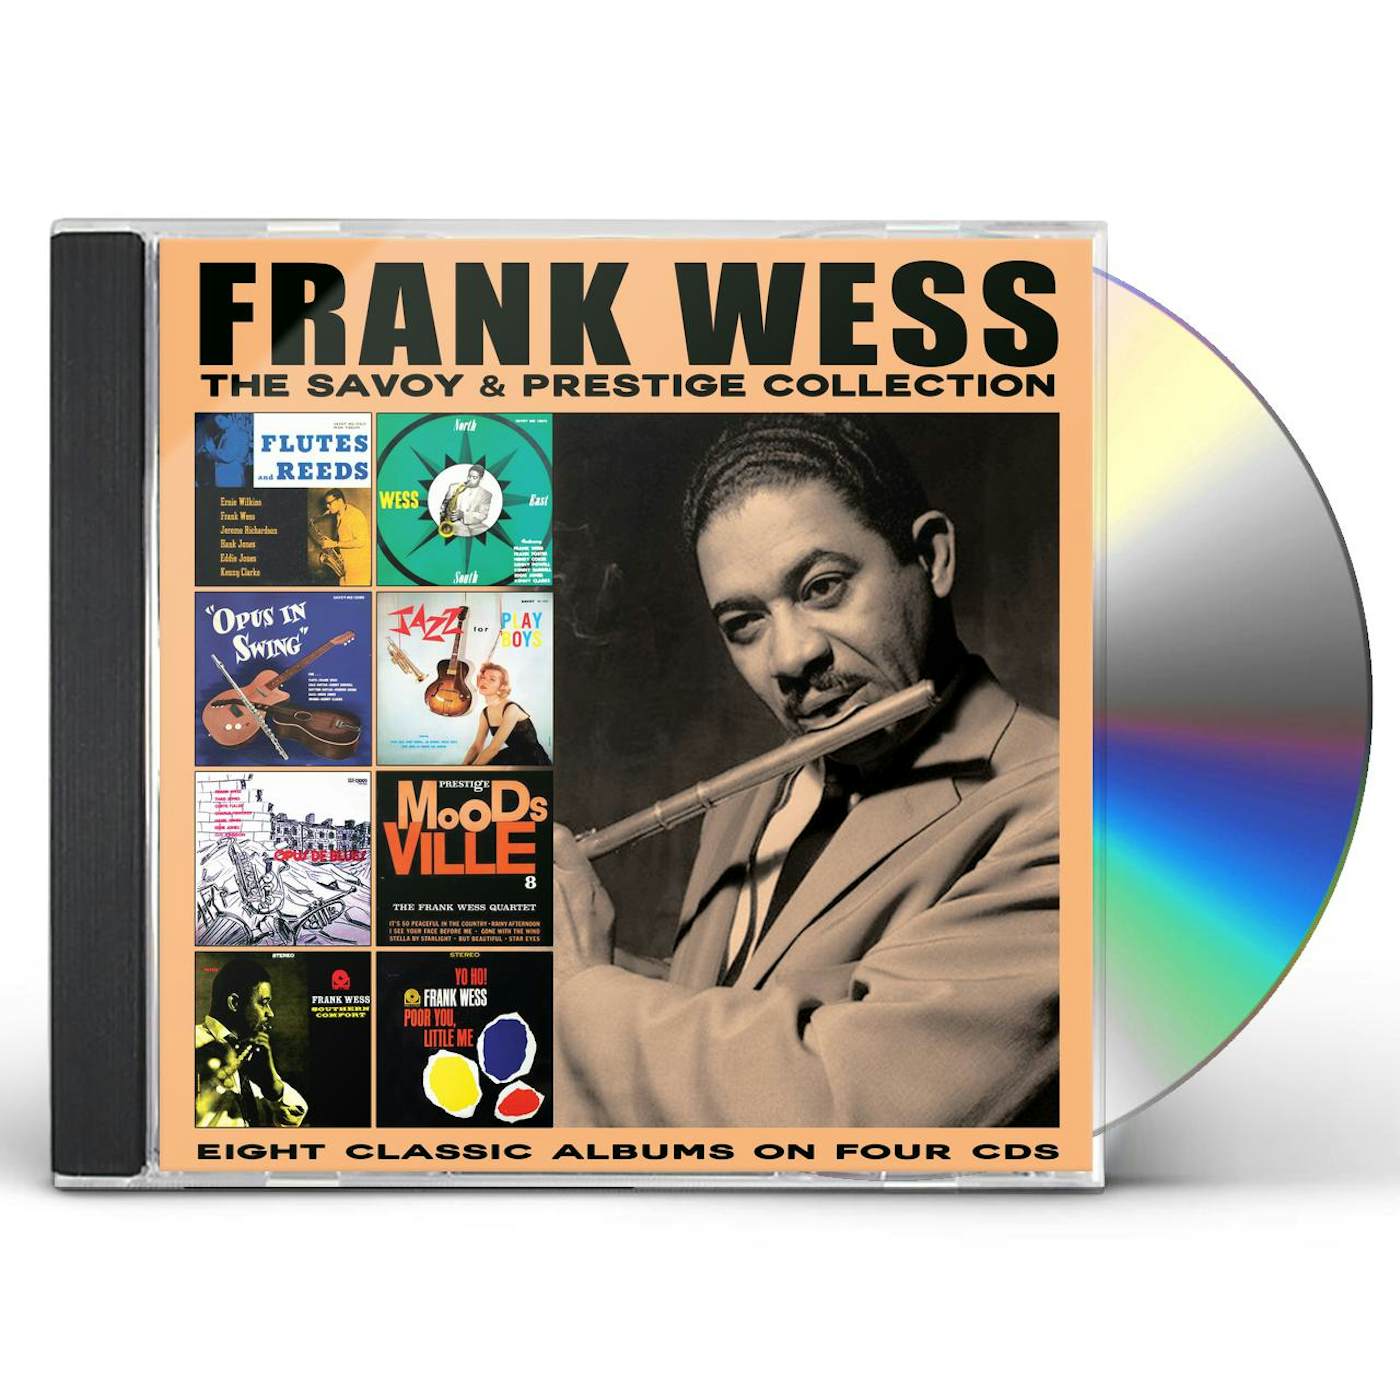 Frank Wess SAVOY & PRESTIGE COLLECTION CD